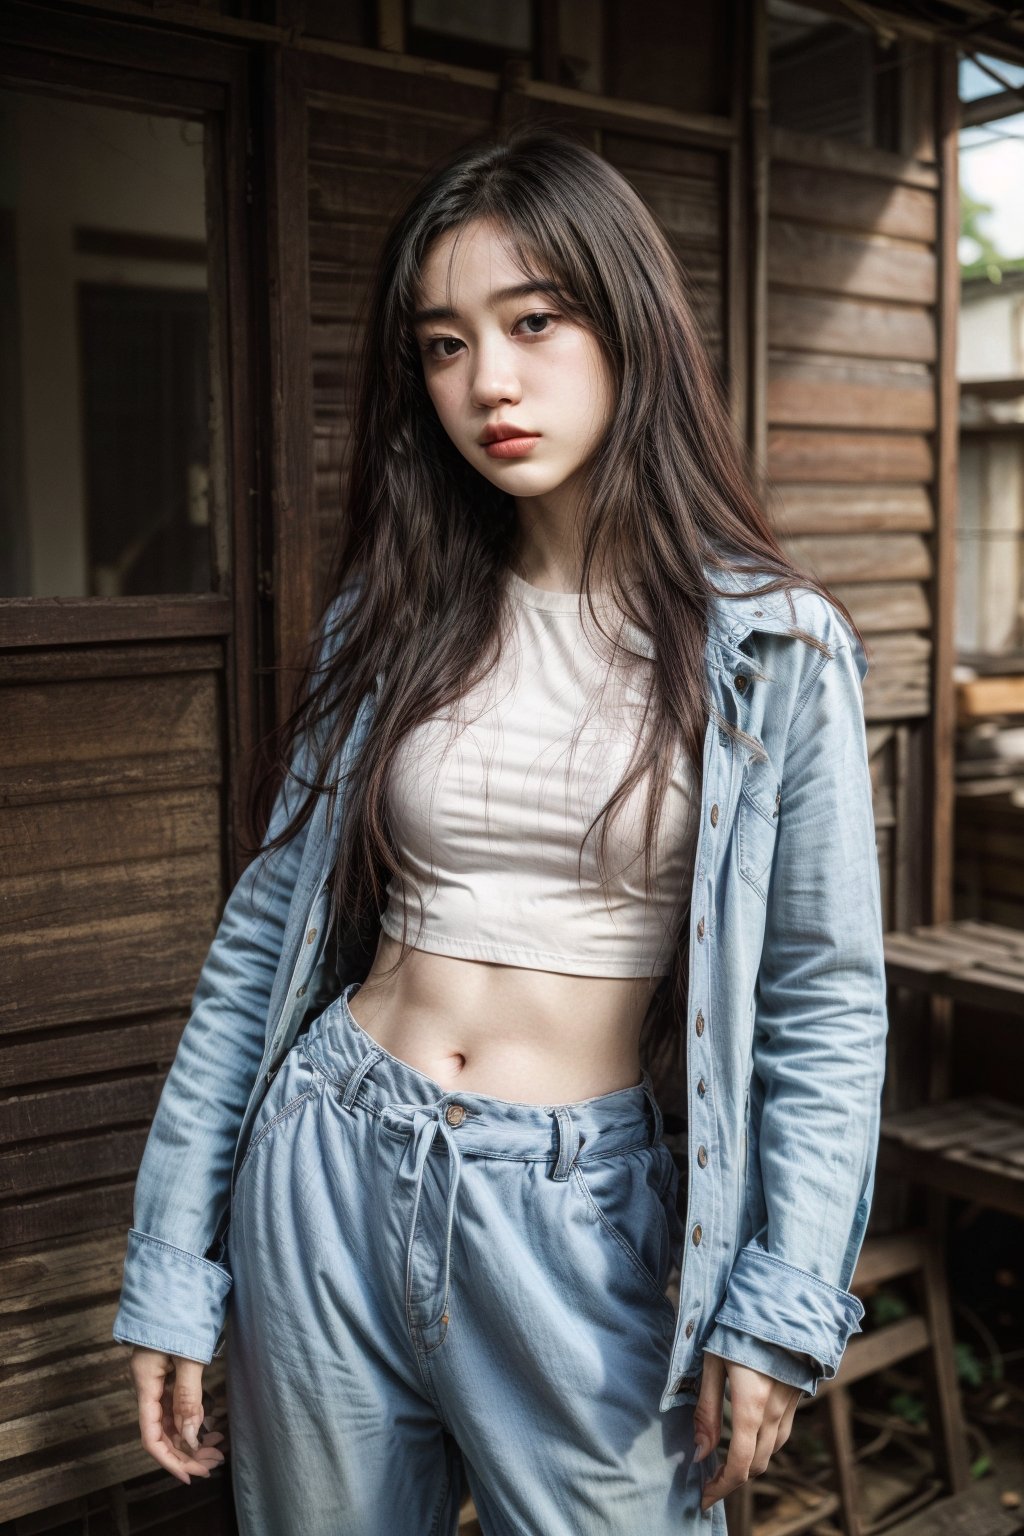 Honey,HoneyNwayOo,HanNiNwayOo,A young woman with long black hair, wearing a shirt, a jacket, and light blue pants with a bow.(poses:random)

[Photorealistic portrait, inspired by the work of Peter Lindbergh and Annie Leibovitz, with a touch of naturalism reminiscent of Steve McCurry], [Shallow depth of field, 50mm lens, natural lighting, soft shadows, muted color palette, subtle grain, textured background, realistic rendering]